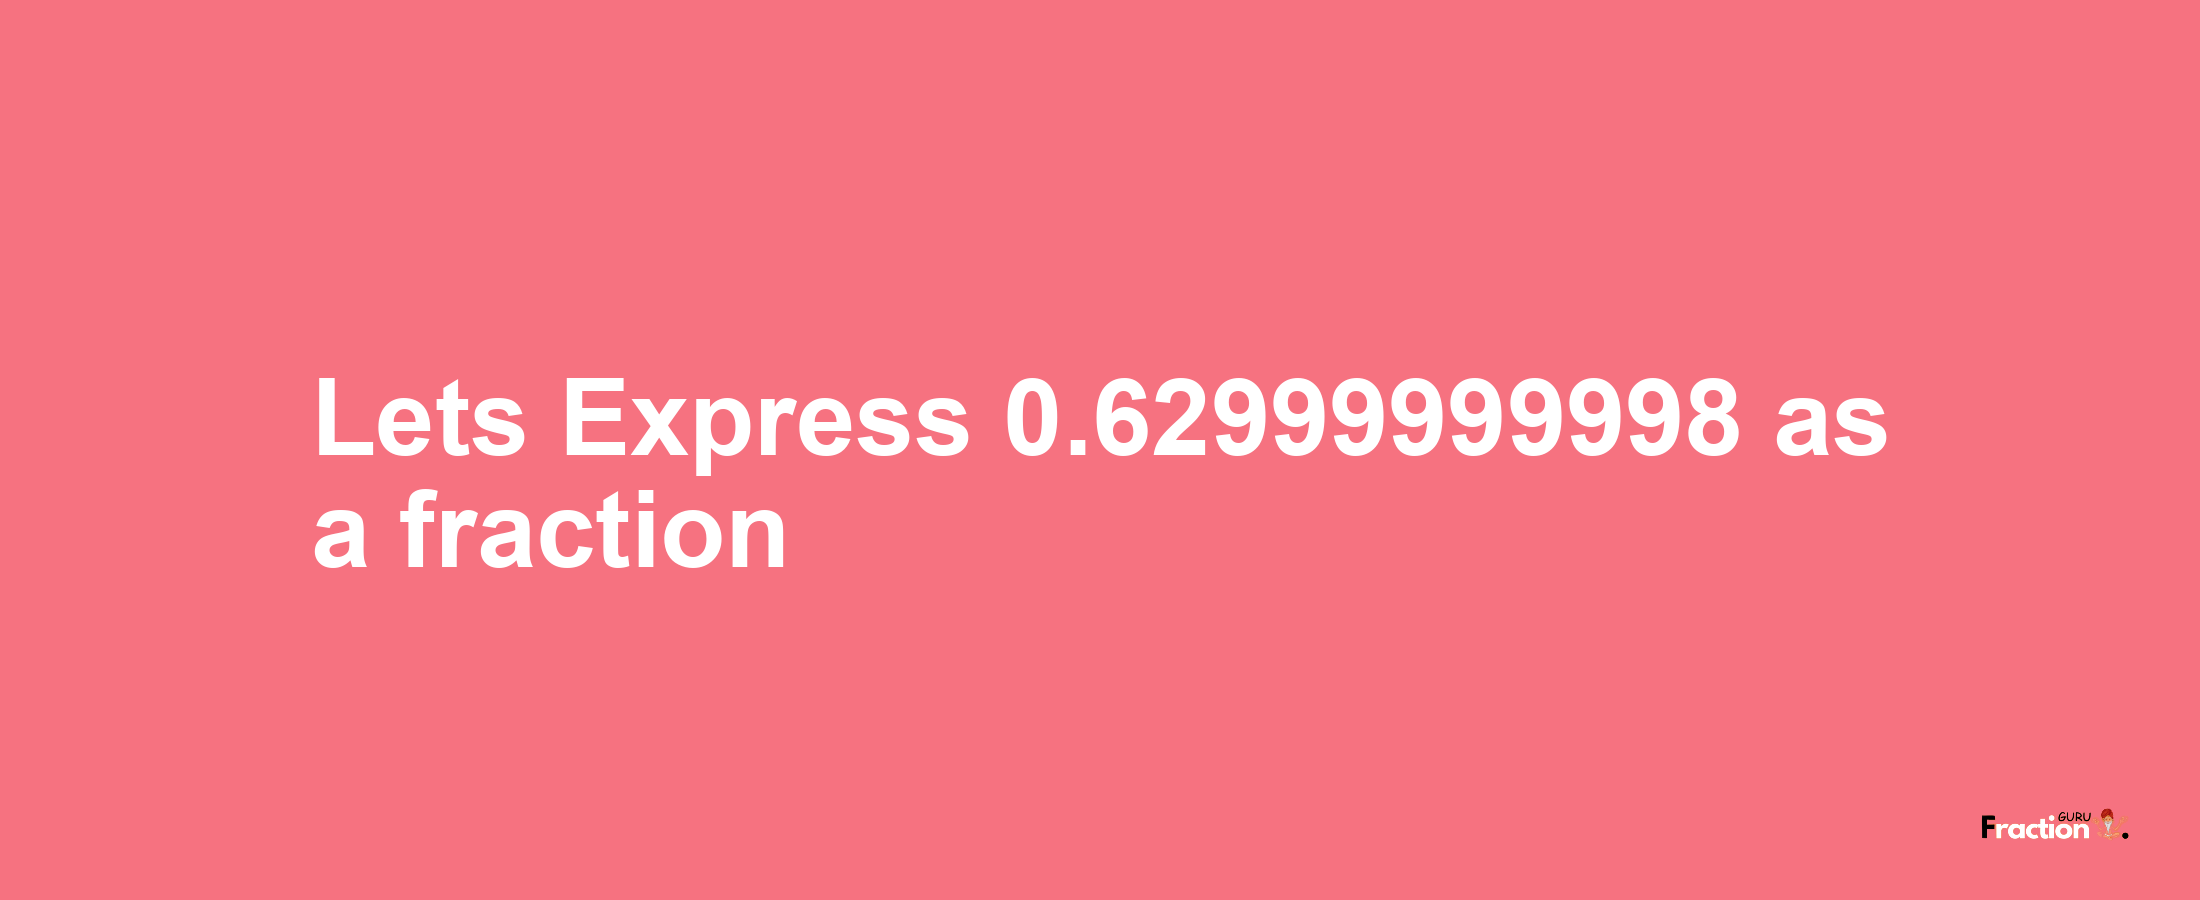 Lets Express 0.62999999998 as afraction